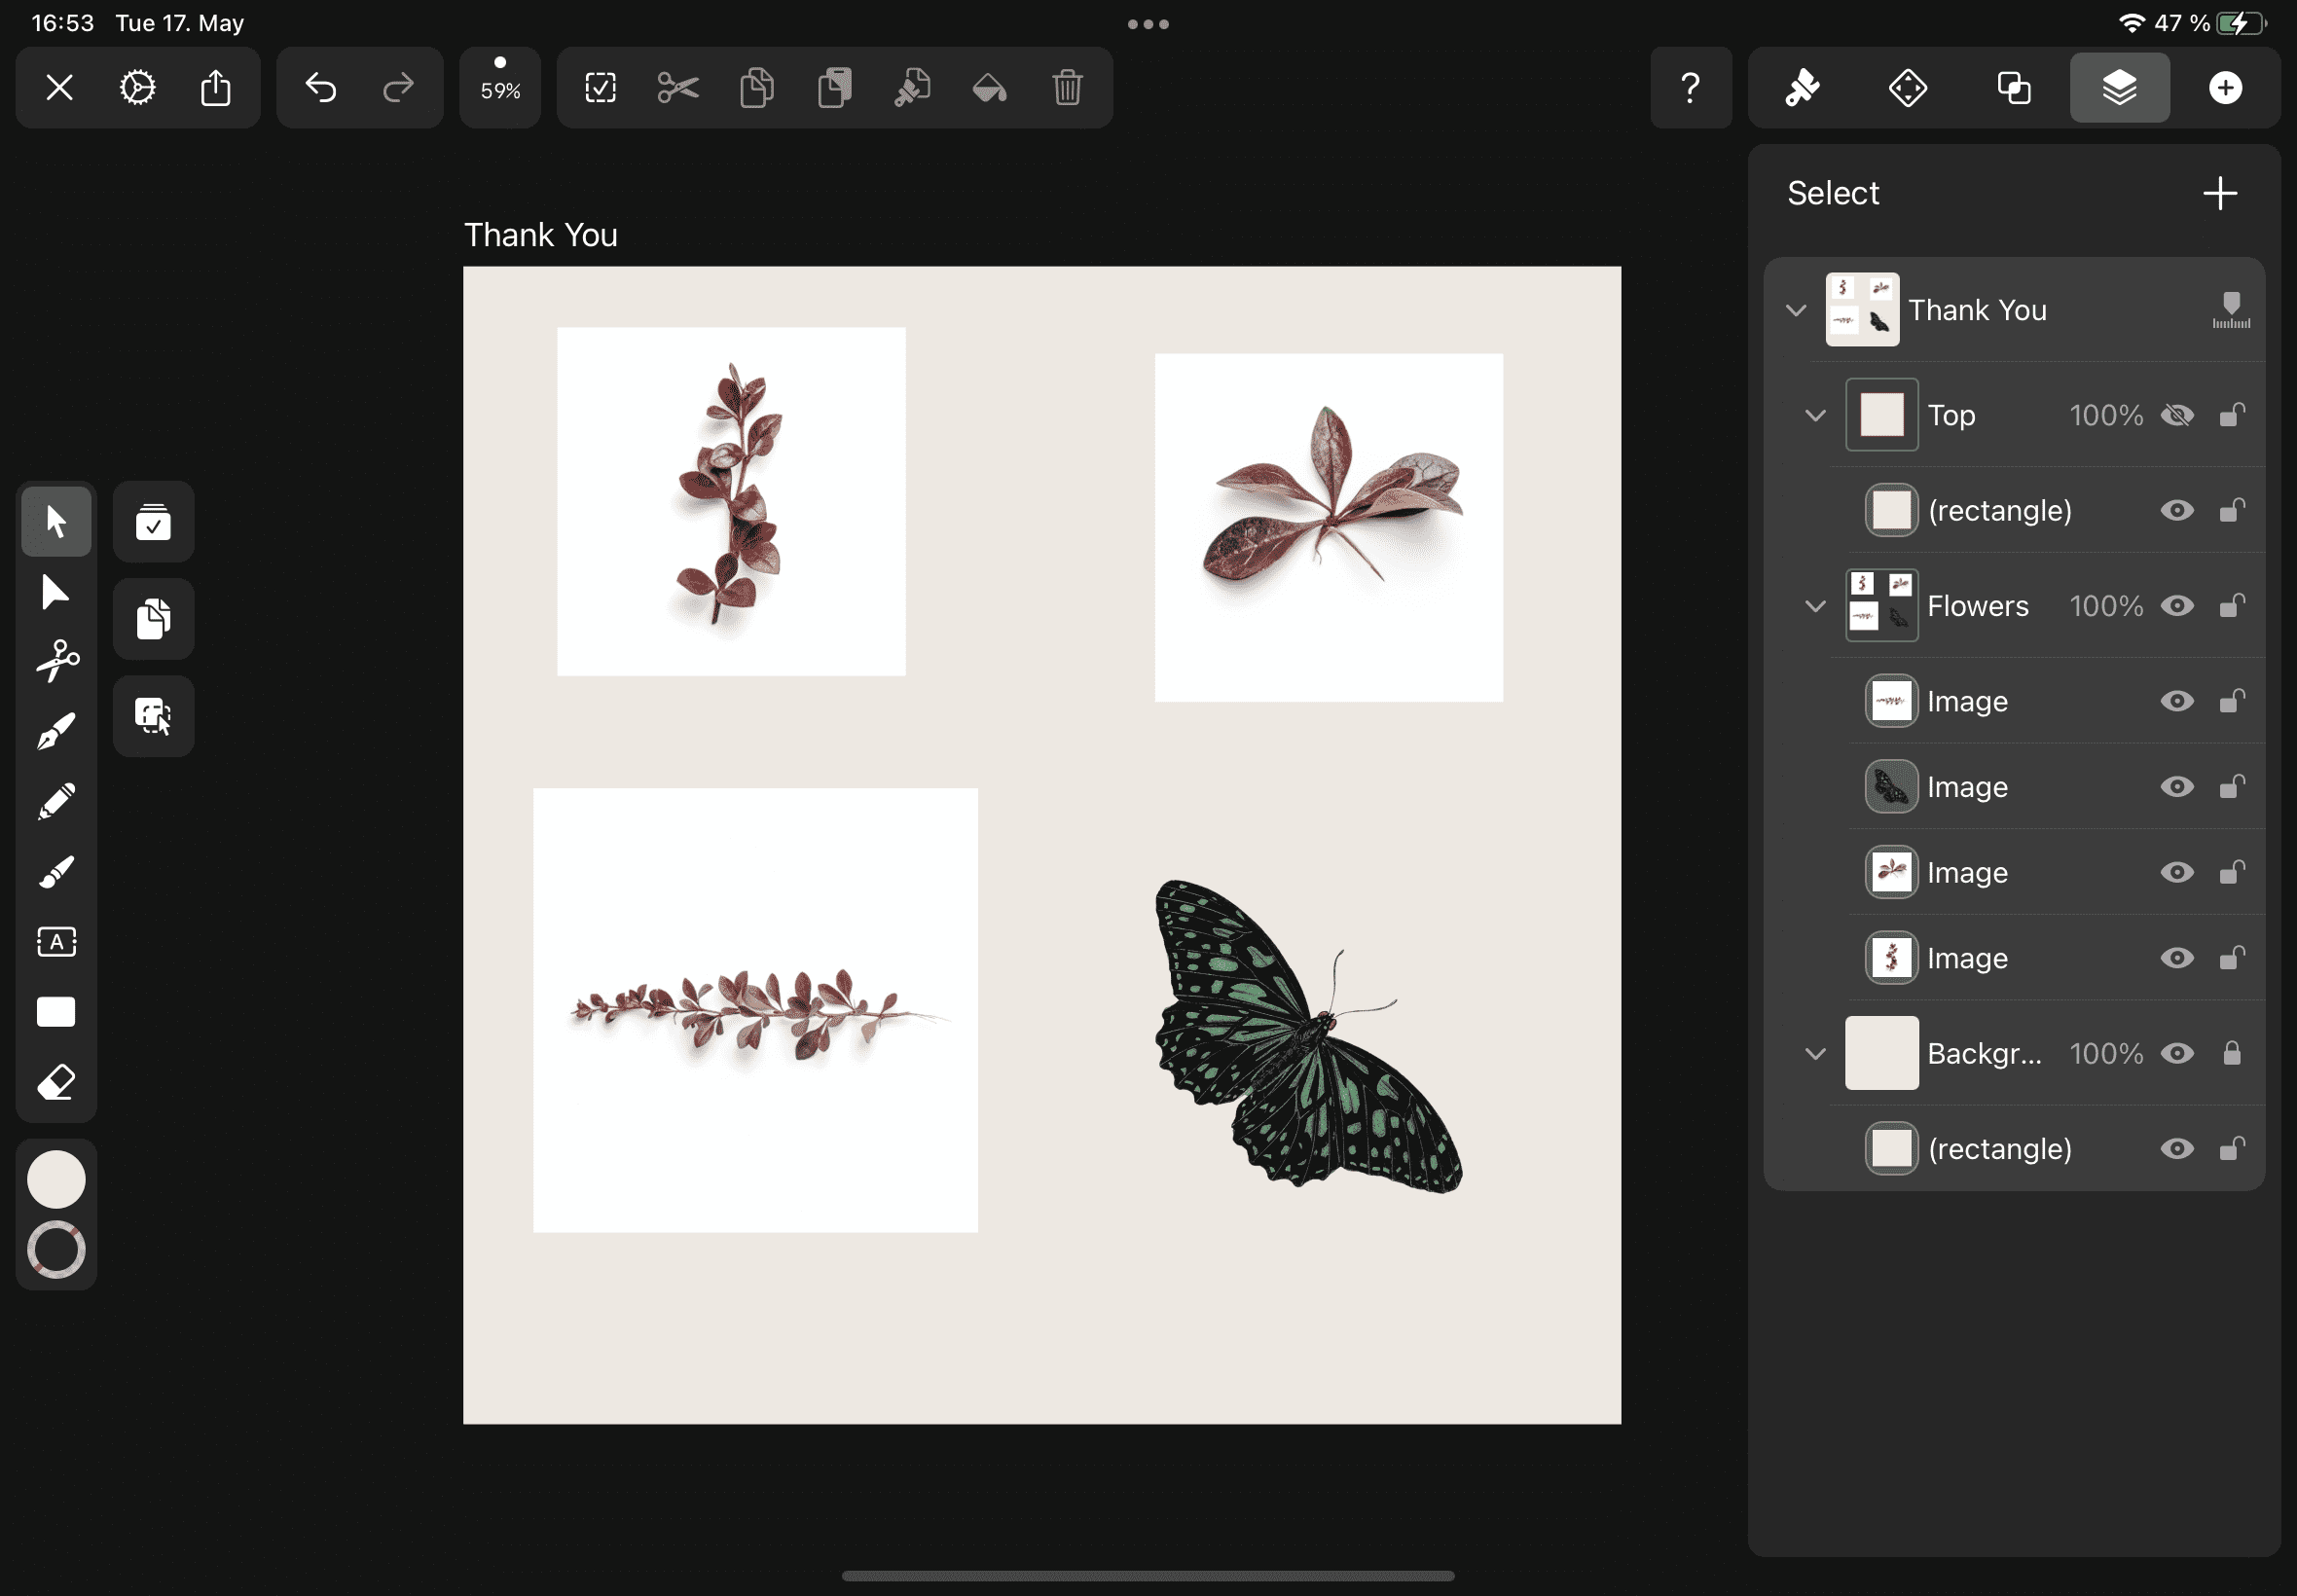 Graphic design interface with butterflies and flowers